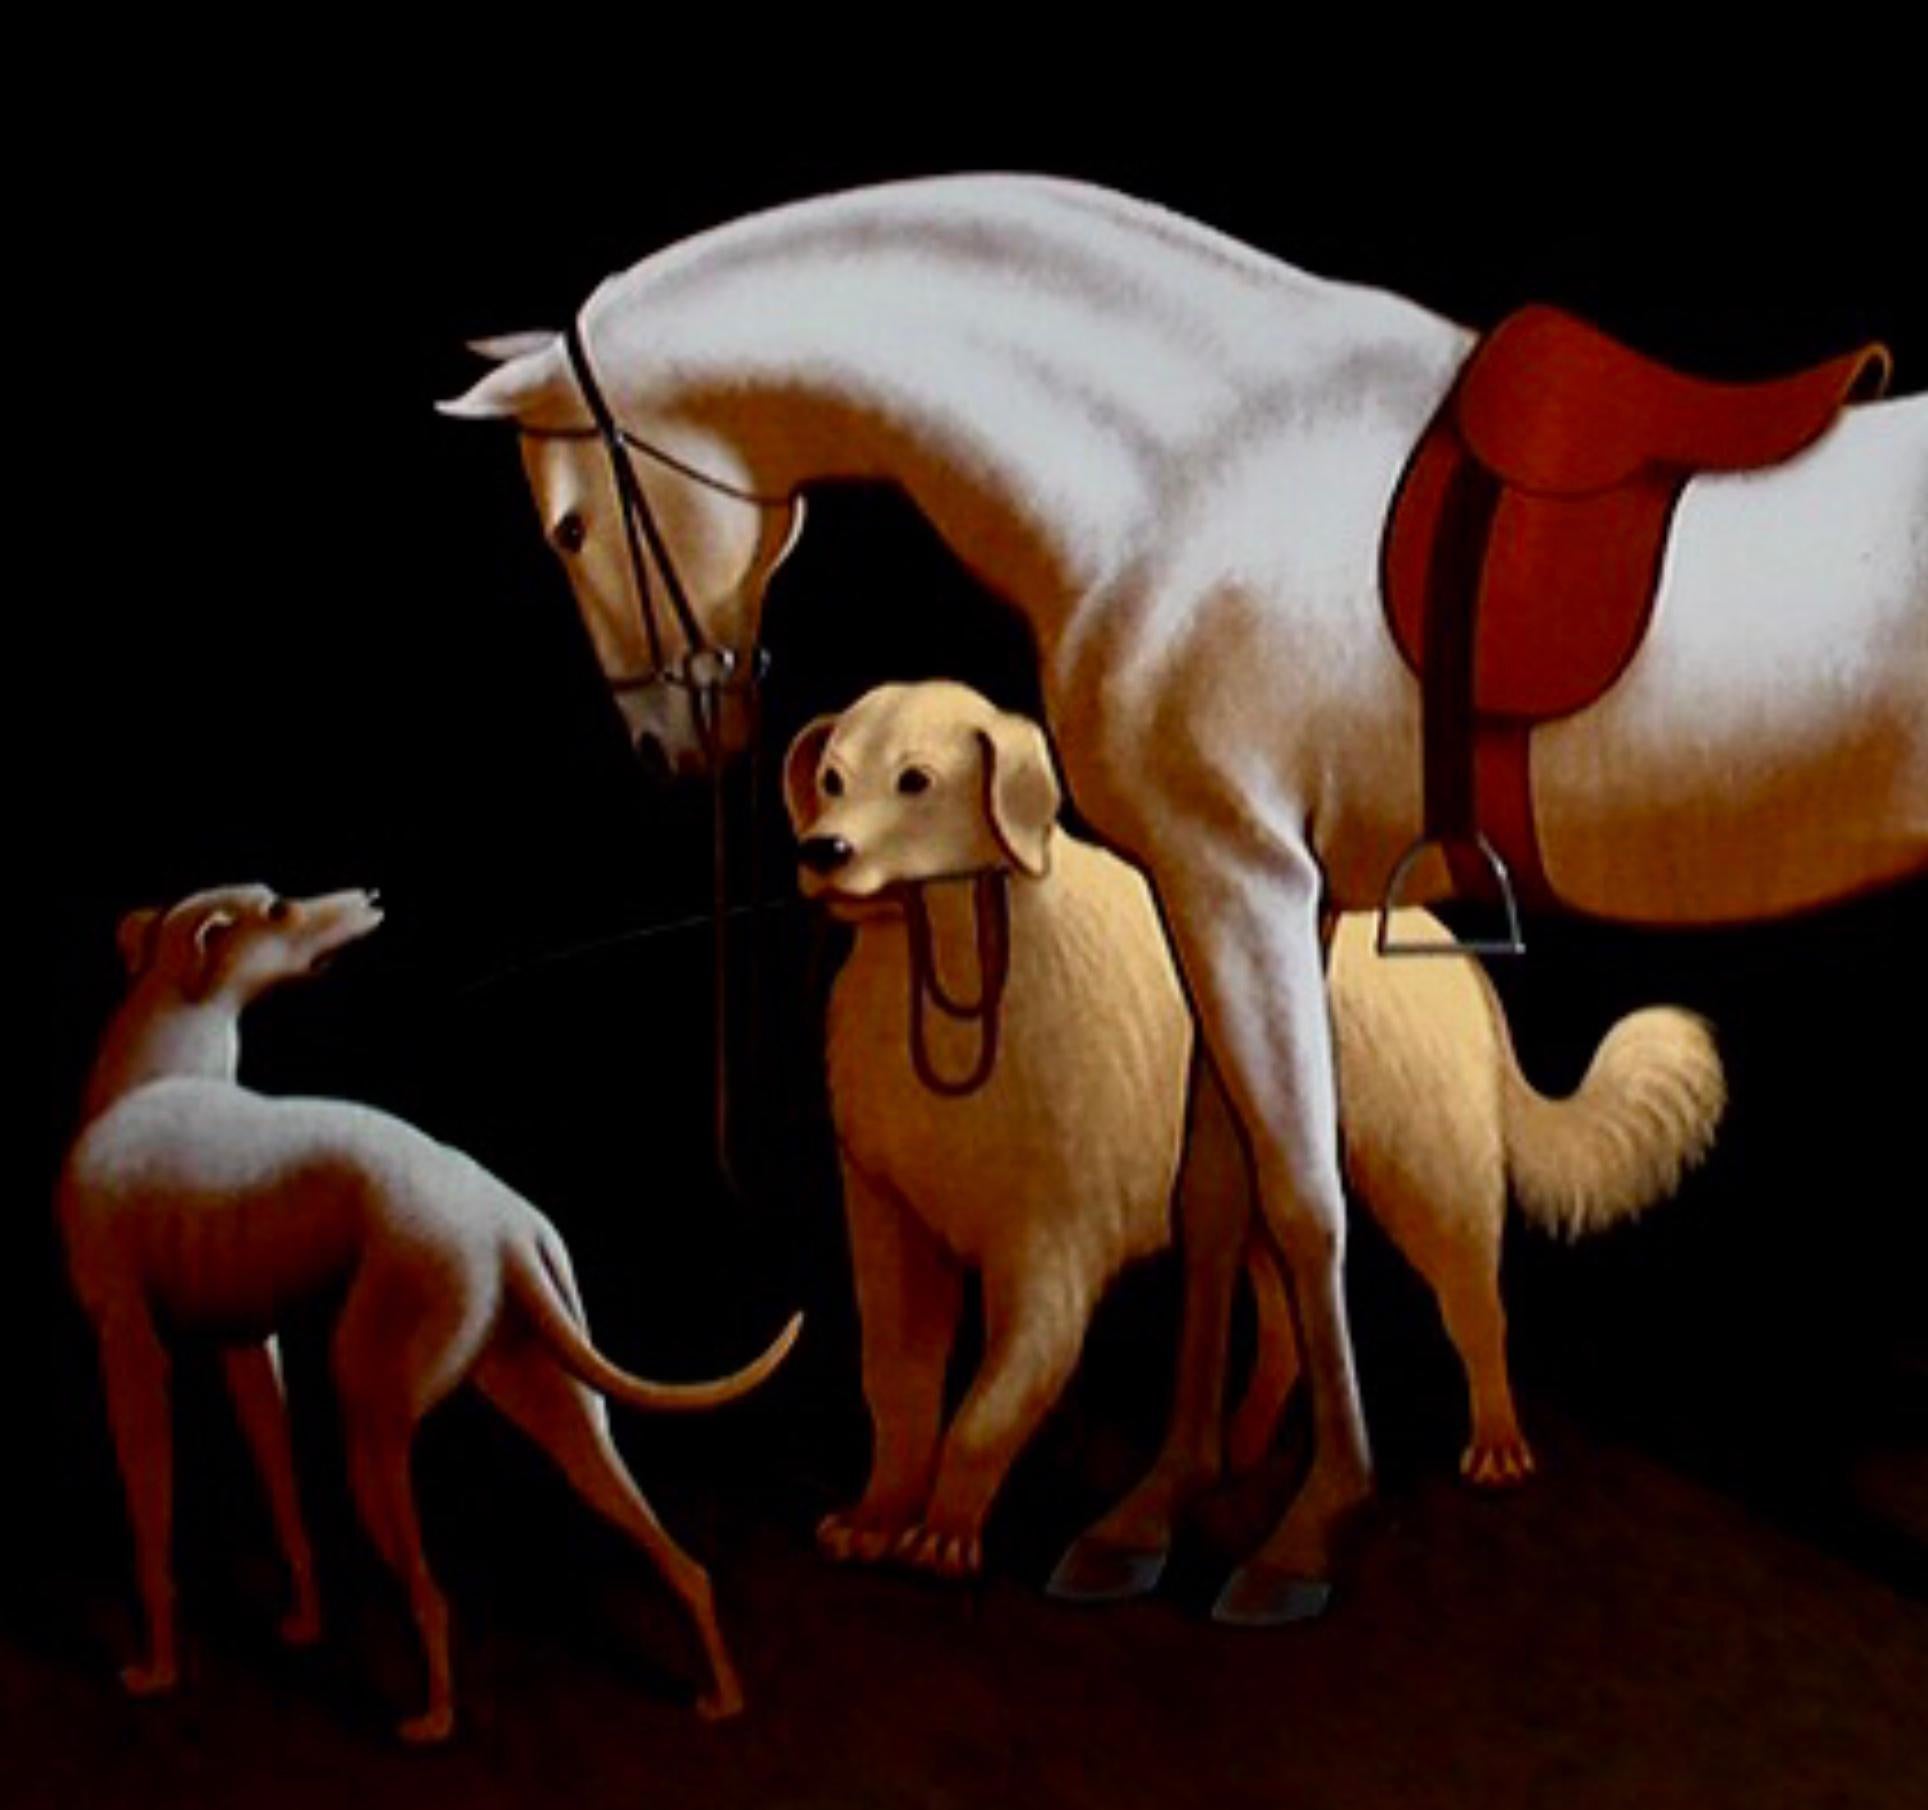 THE FAVORITE
Original painting by Lynn Curlee
Acrylic on stretched canvas
This painting was used for the poster for the 
1995 HAMPTON CLASSIC HORSE SHOW
Mr. Curlee is a gallery artist and author / illustrator 
of 14 illustrated Nonfiction books for